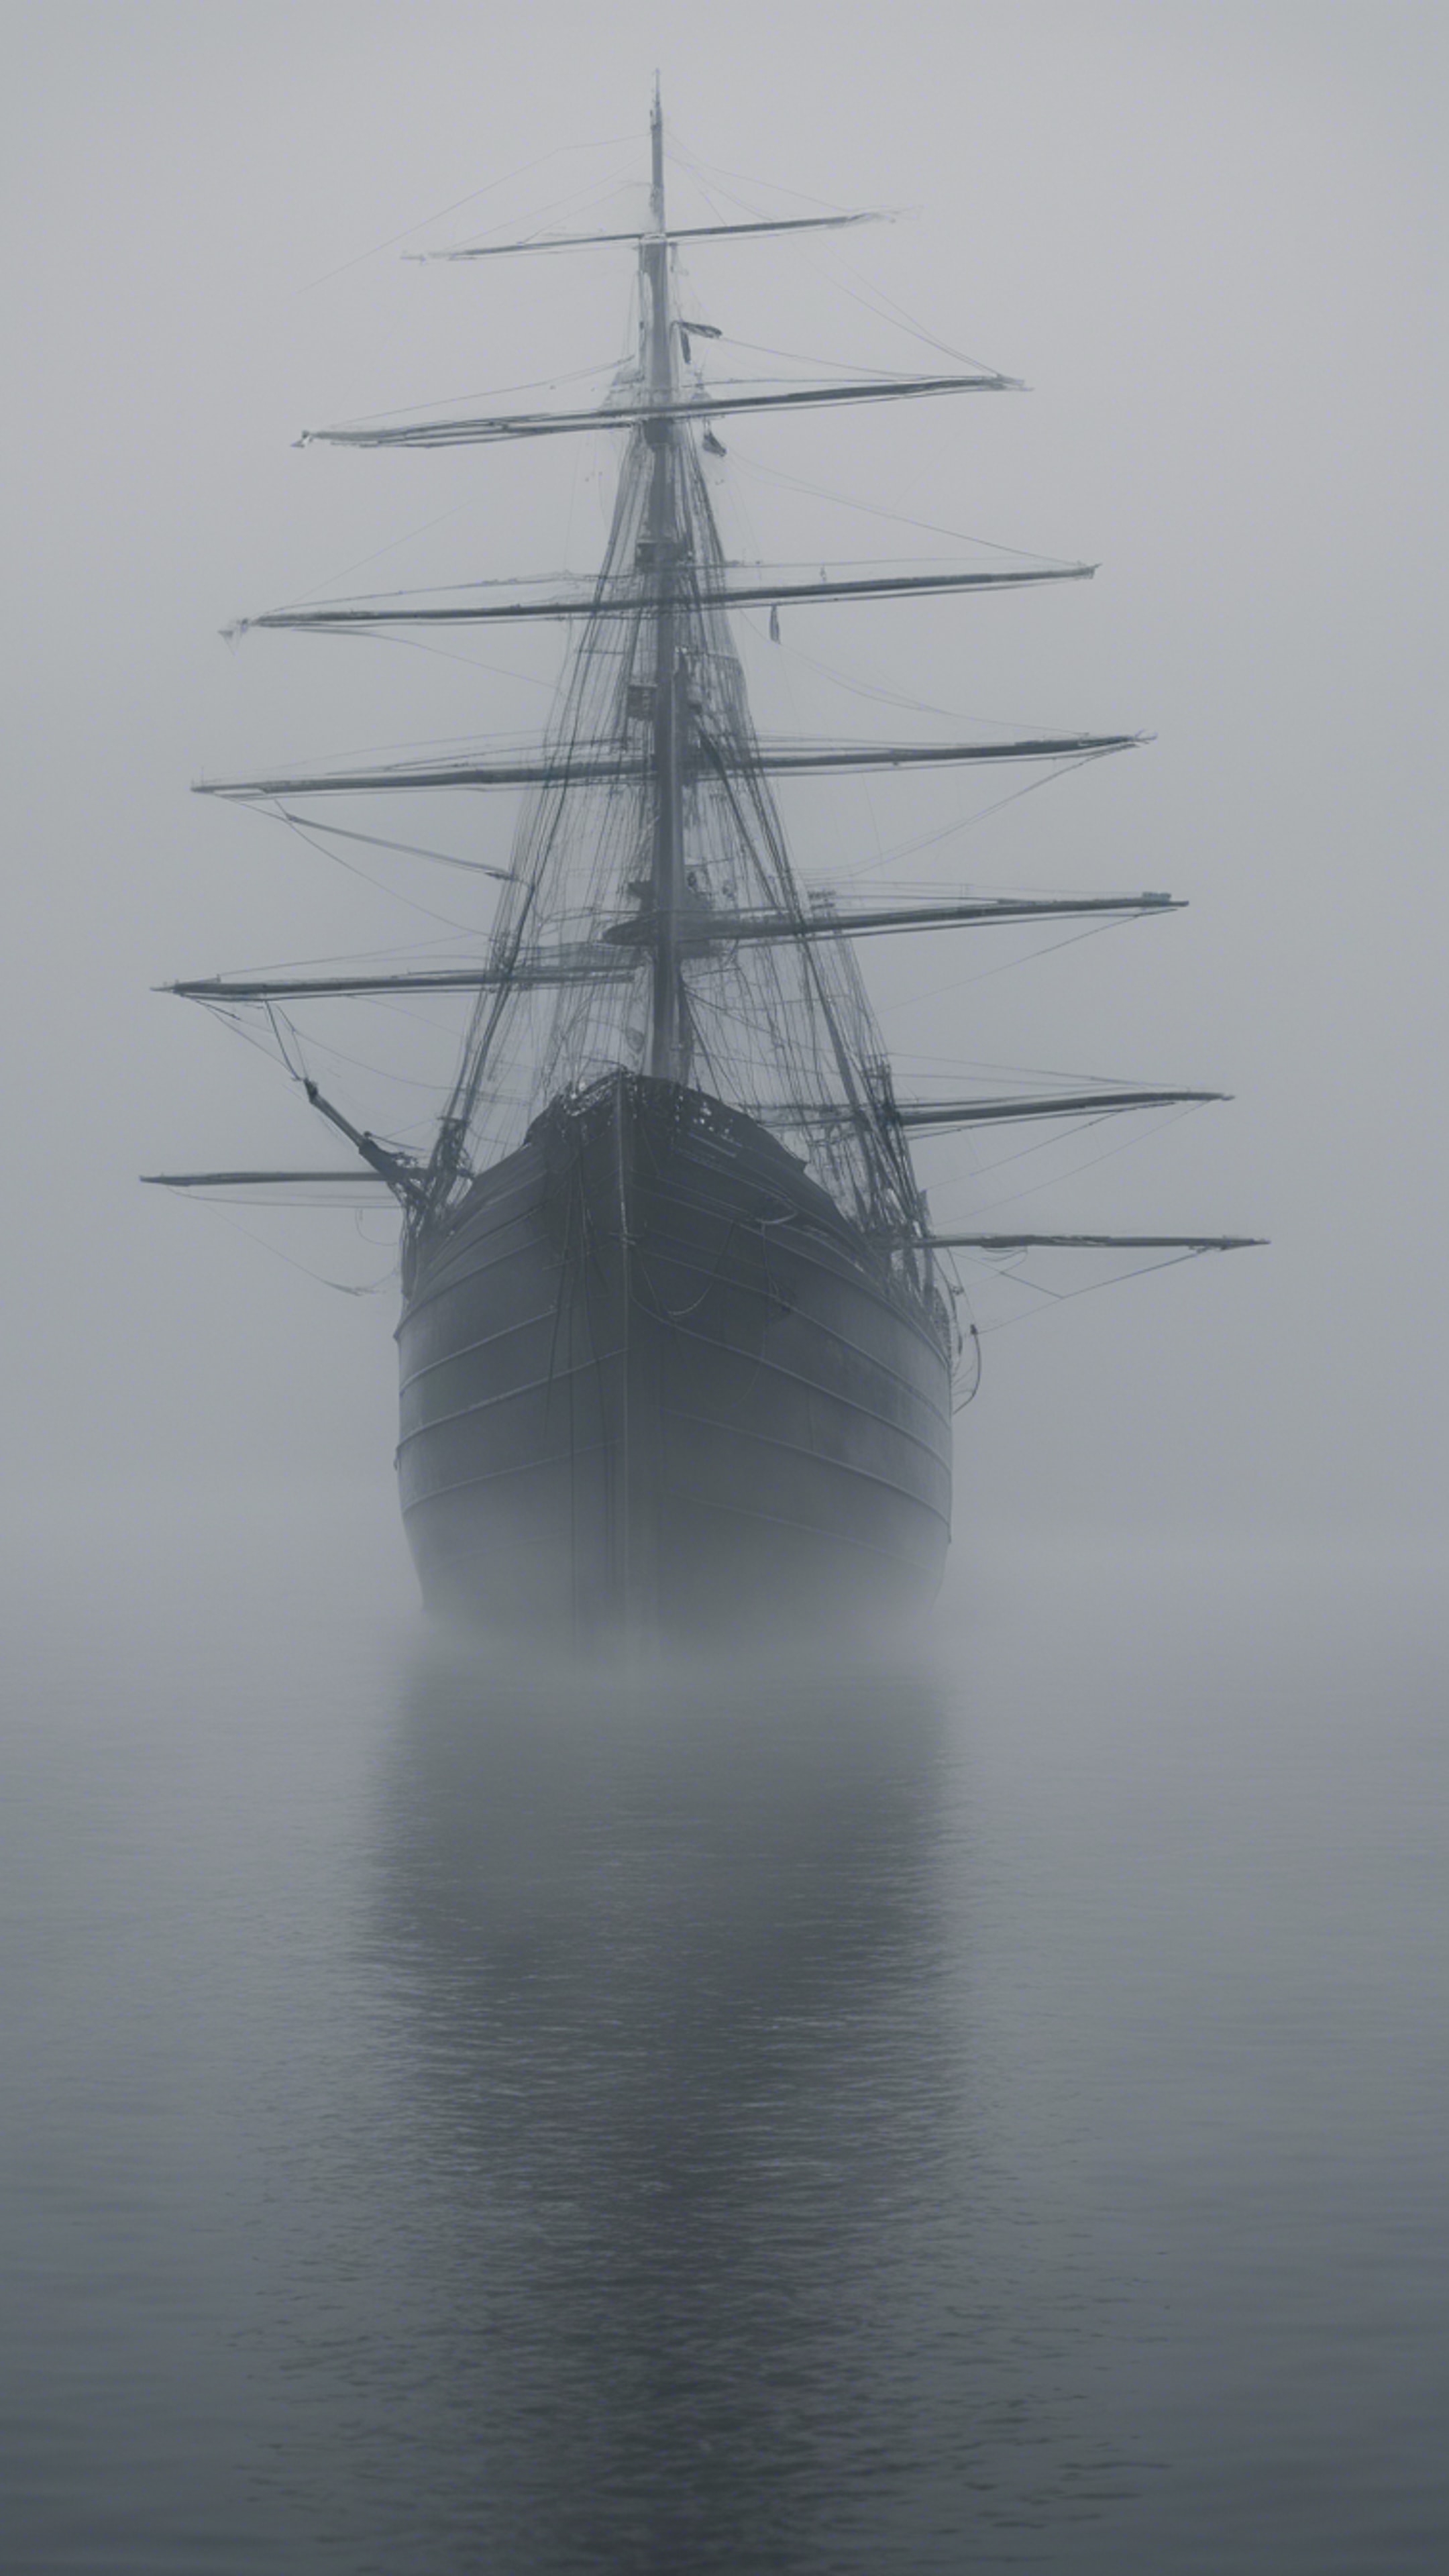 A ghost ship sailing through heavy fog, its masts obscured in drifting grey smoke. Tapet[277c5cc3bc0e4445b824]